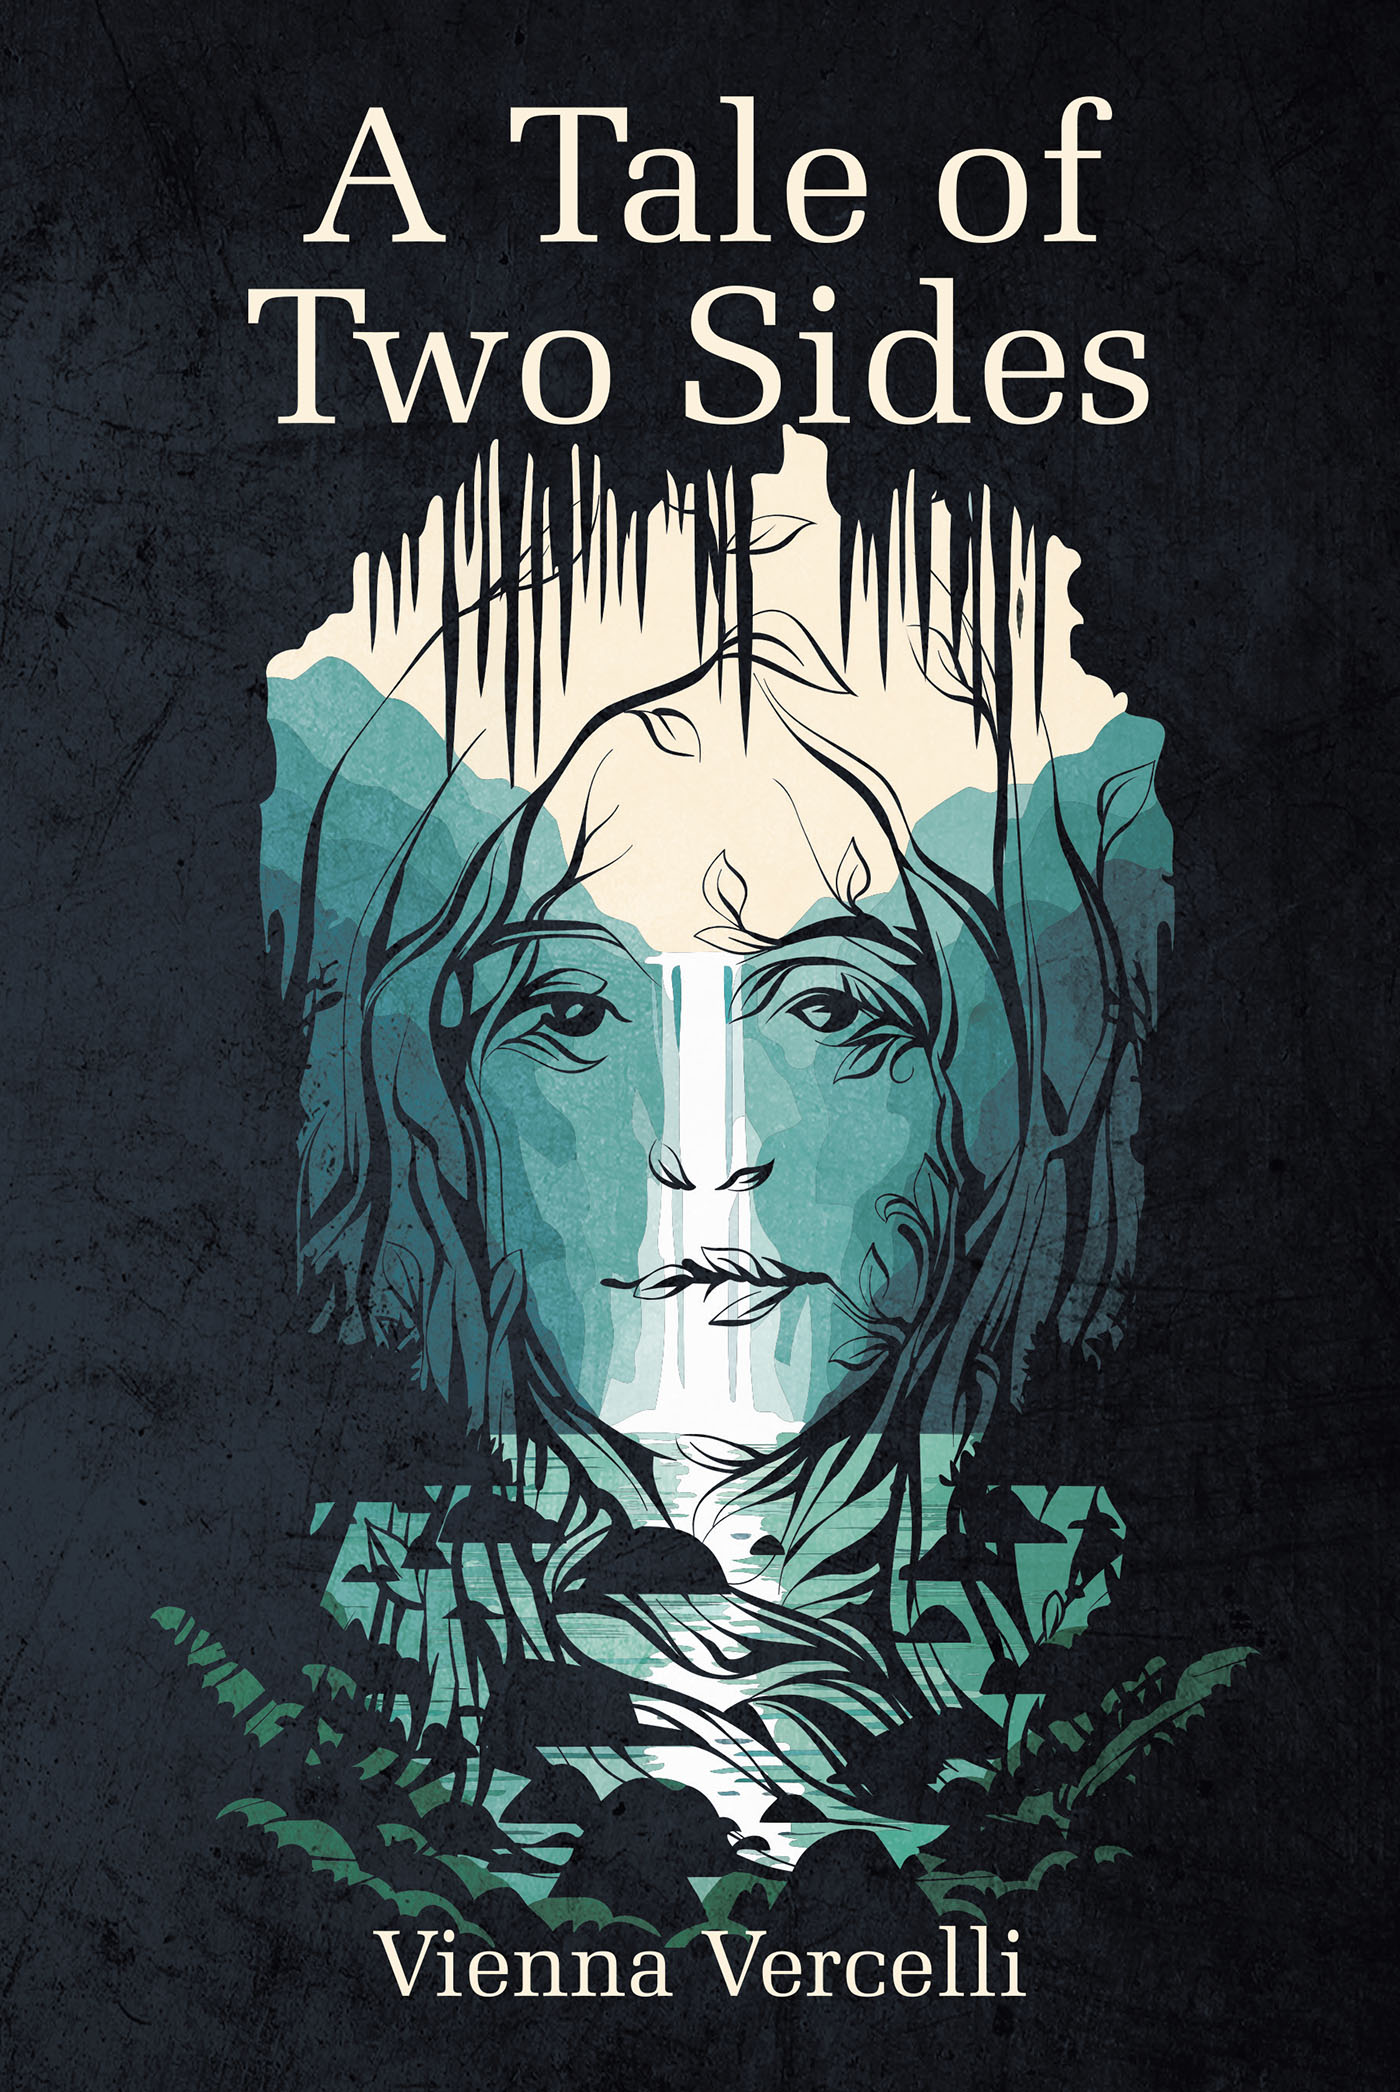 Vienna Vercelli’s Newly Released "A Tale of Two Sides" is a Thought-Provoking Discussion of Choice, Circumstance, and God’s Guiding Hand